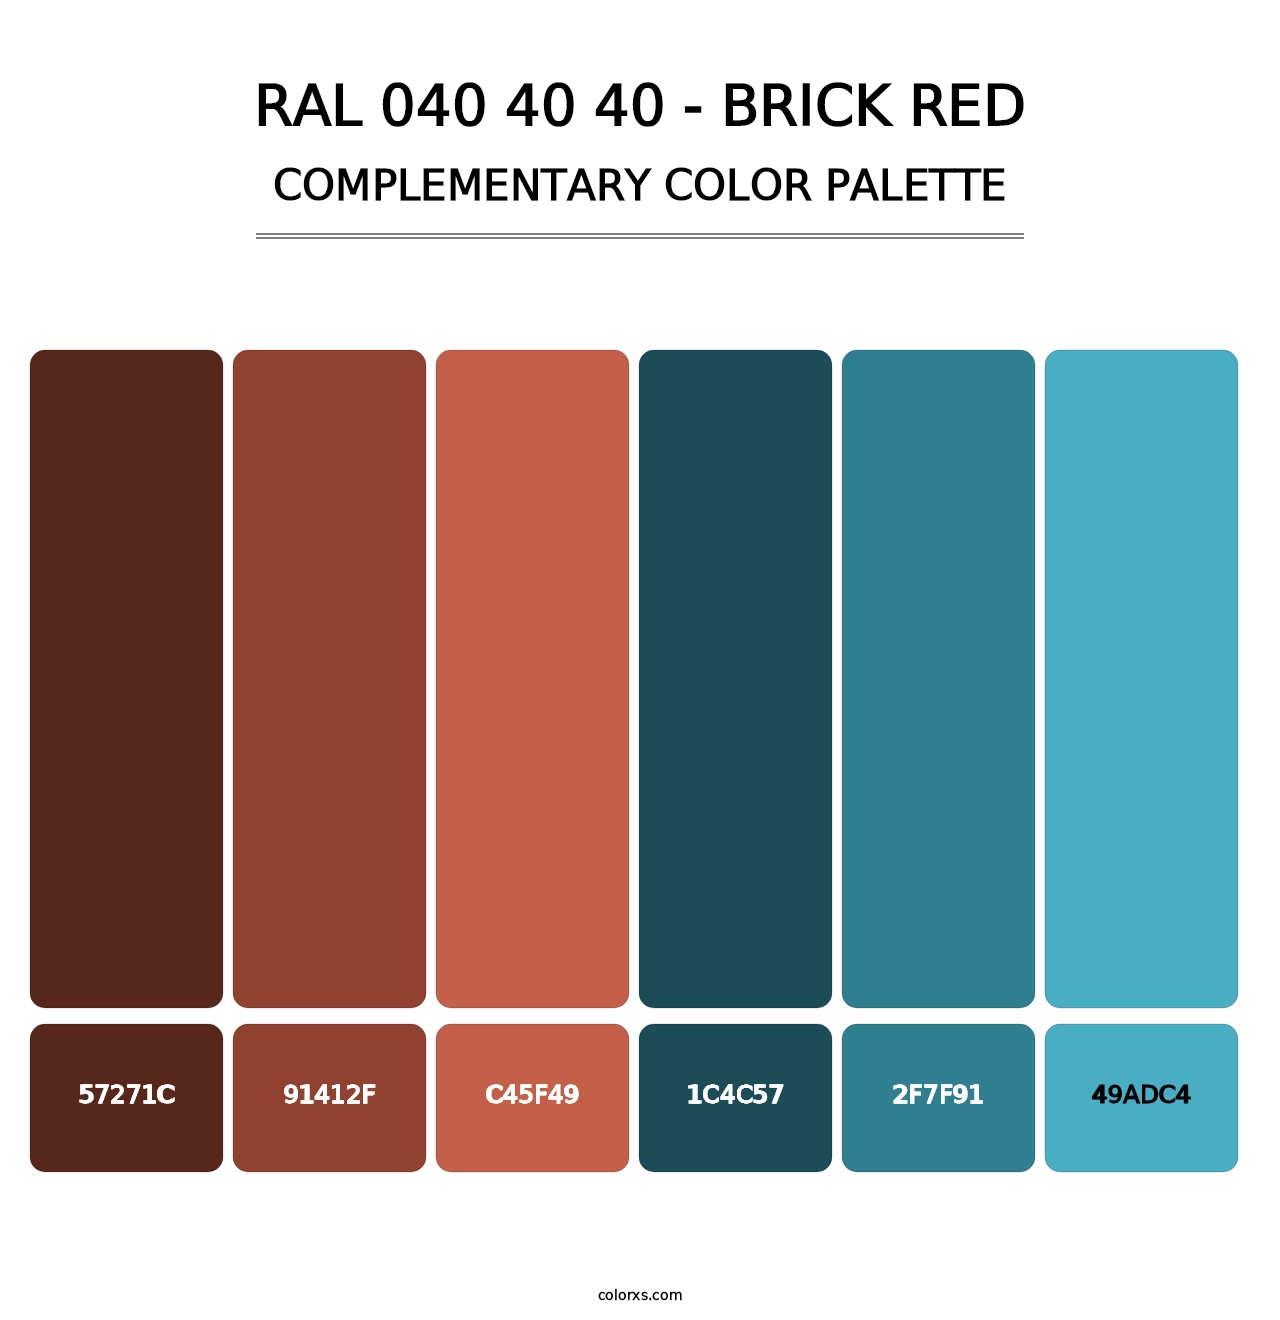 RAL 040 40 40 - Brick Red - Complementary Color Palette